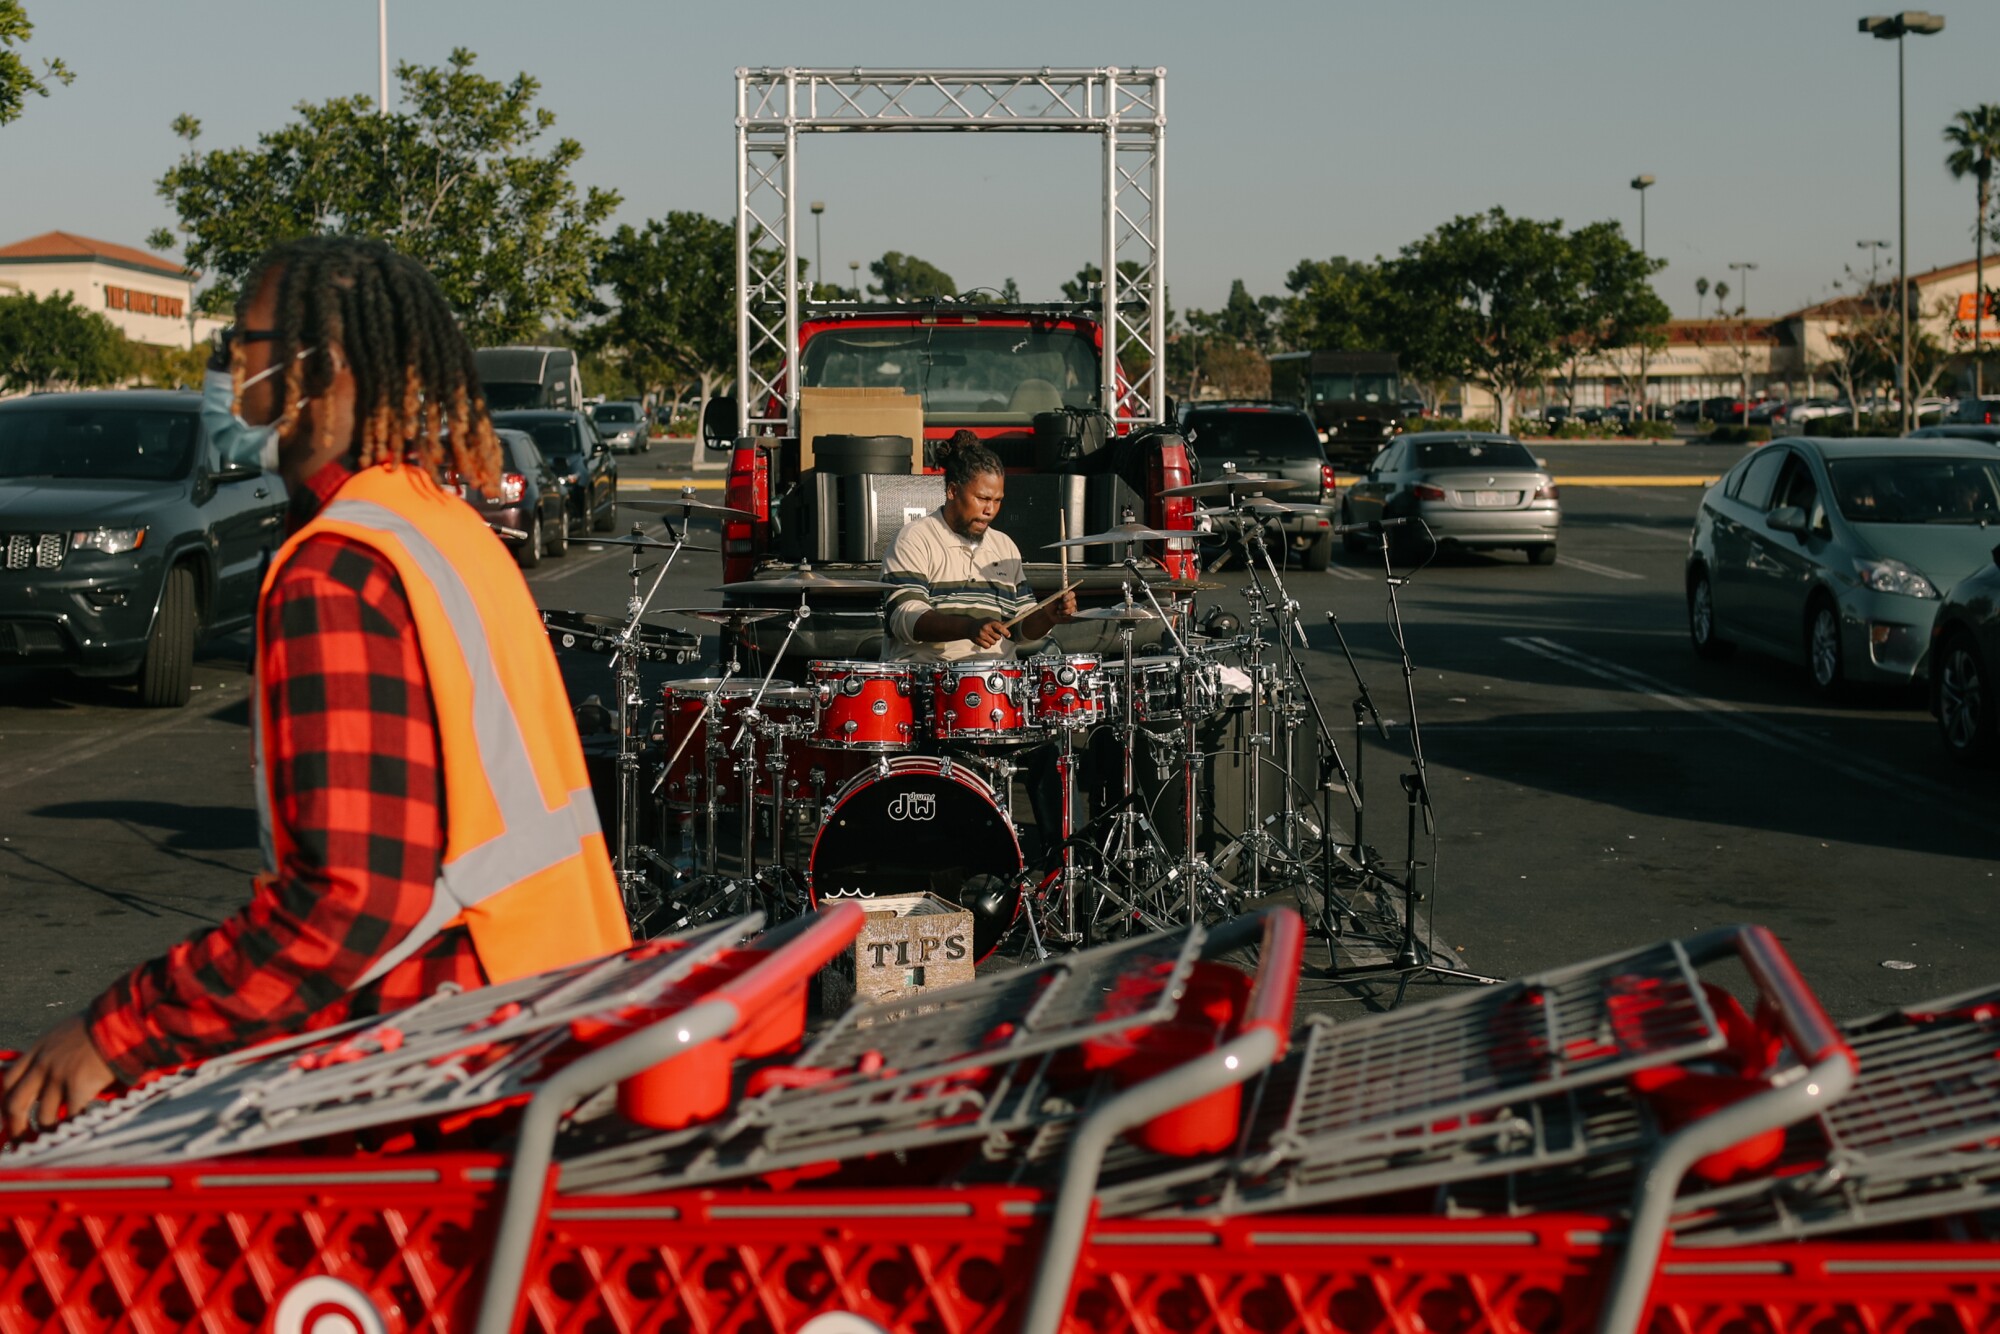 A drummer performs in a Target parking lot.